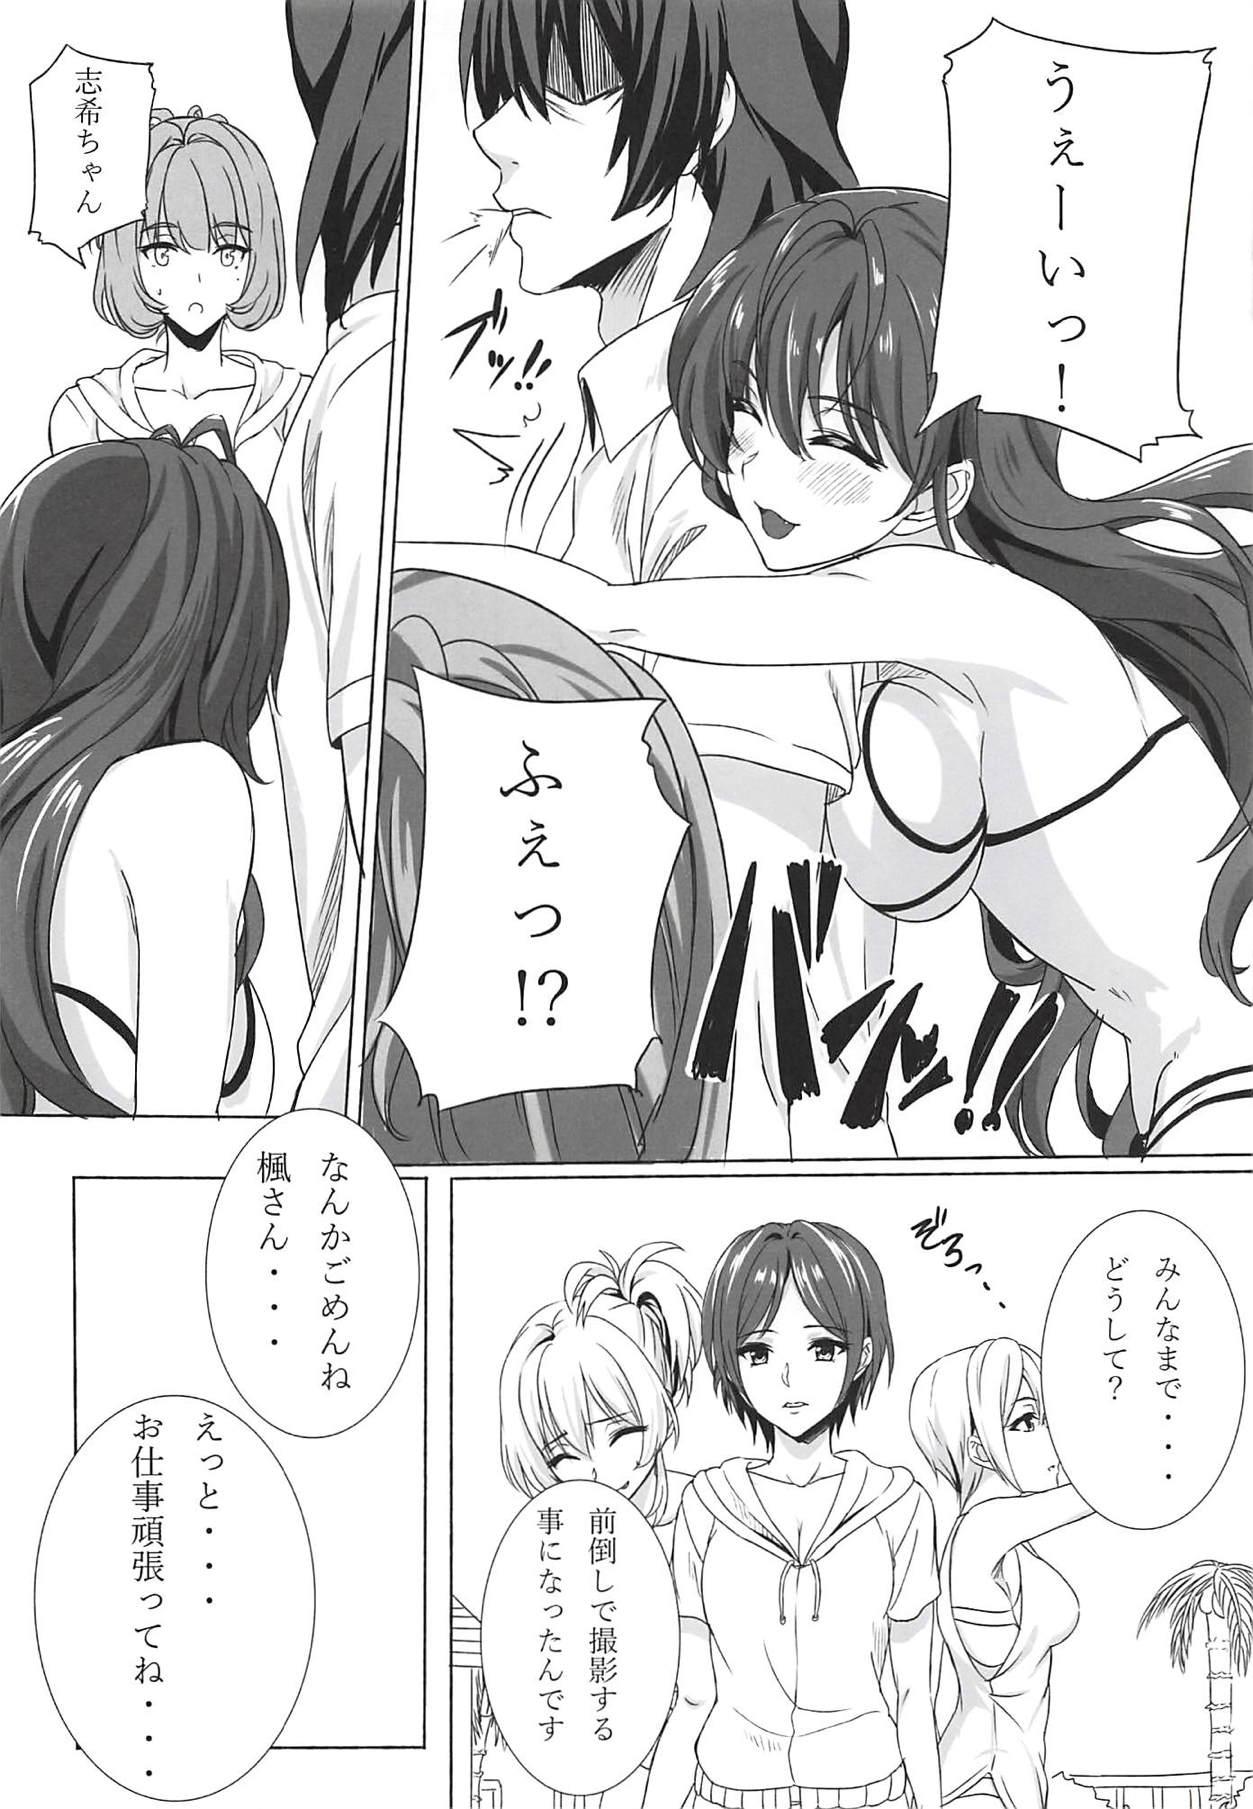 Hot Girl Fucking Koikaze Project IV - The idolmaster Making Love Porn - Page 5